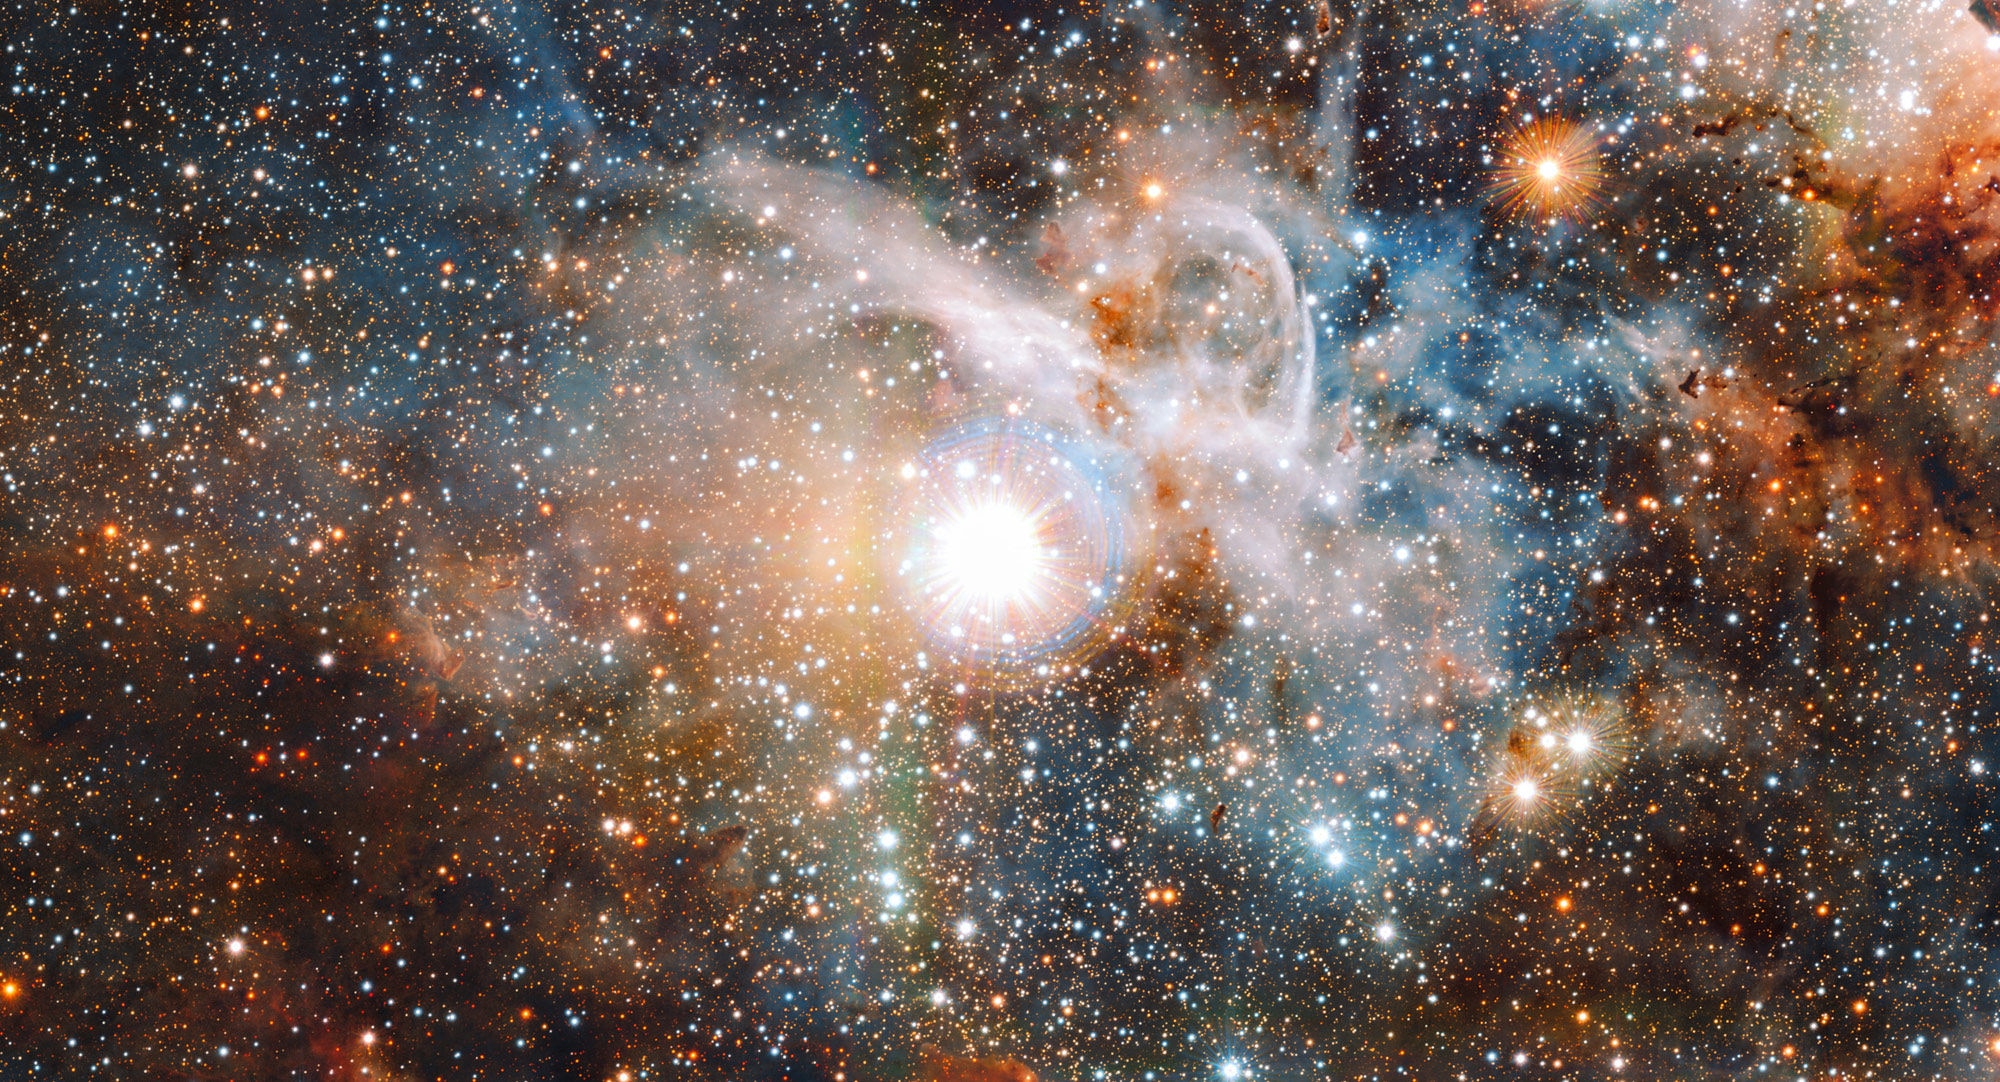 The Carina Nebula, a huge star-forming complex, seen here in the infrared by the Very Large Telescope Survey Telescope. Credit: ESO/J. Emerson/M. Irwin/J. Lewis